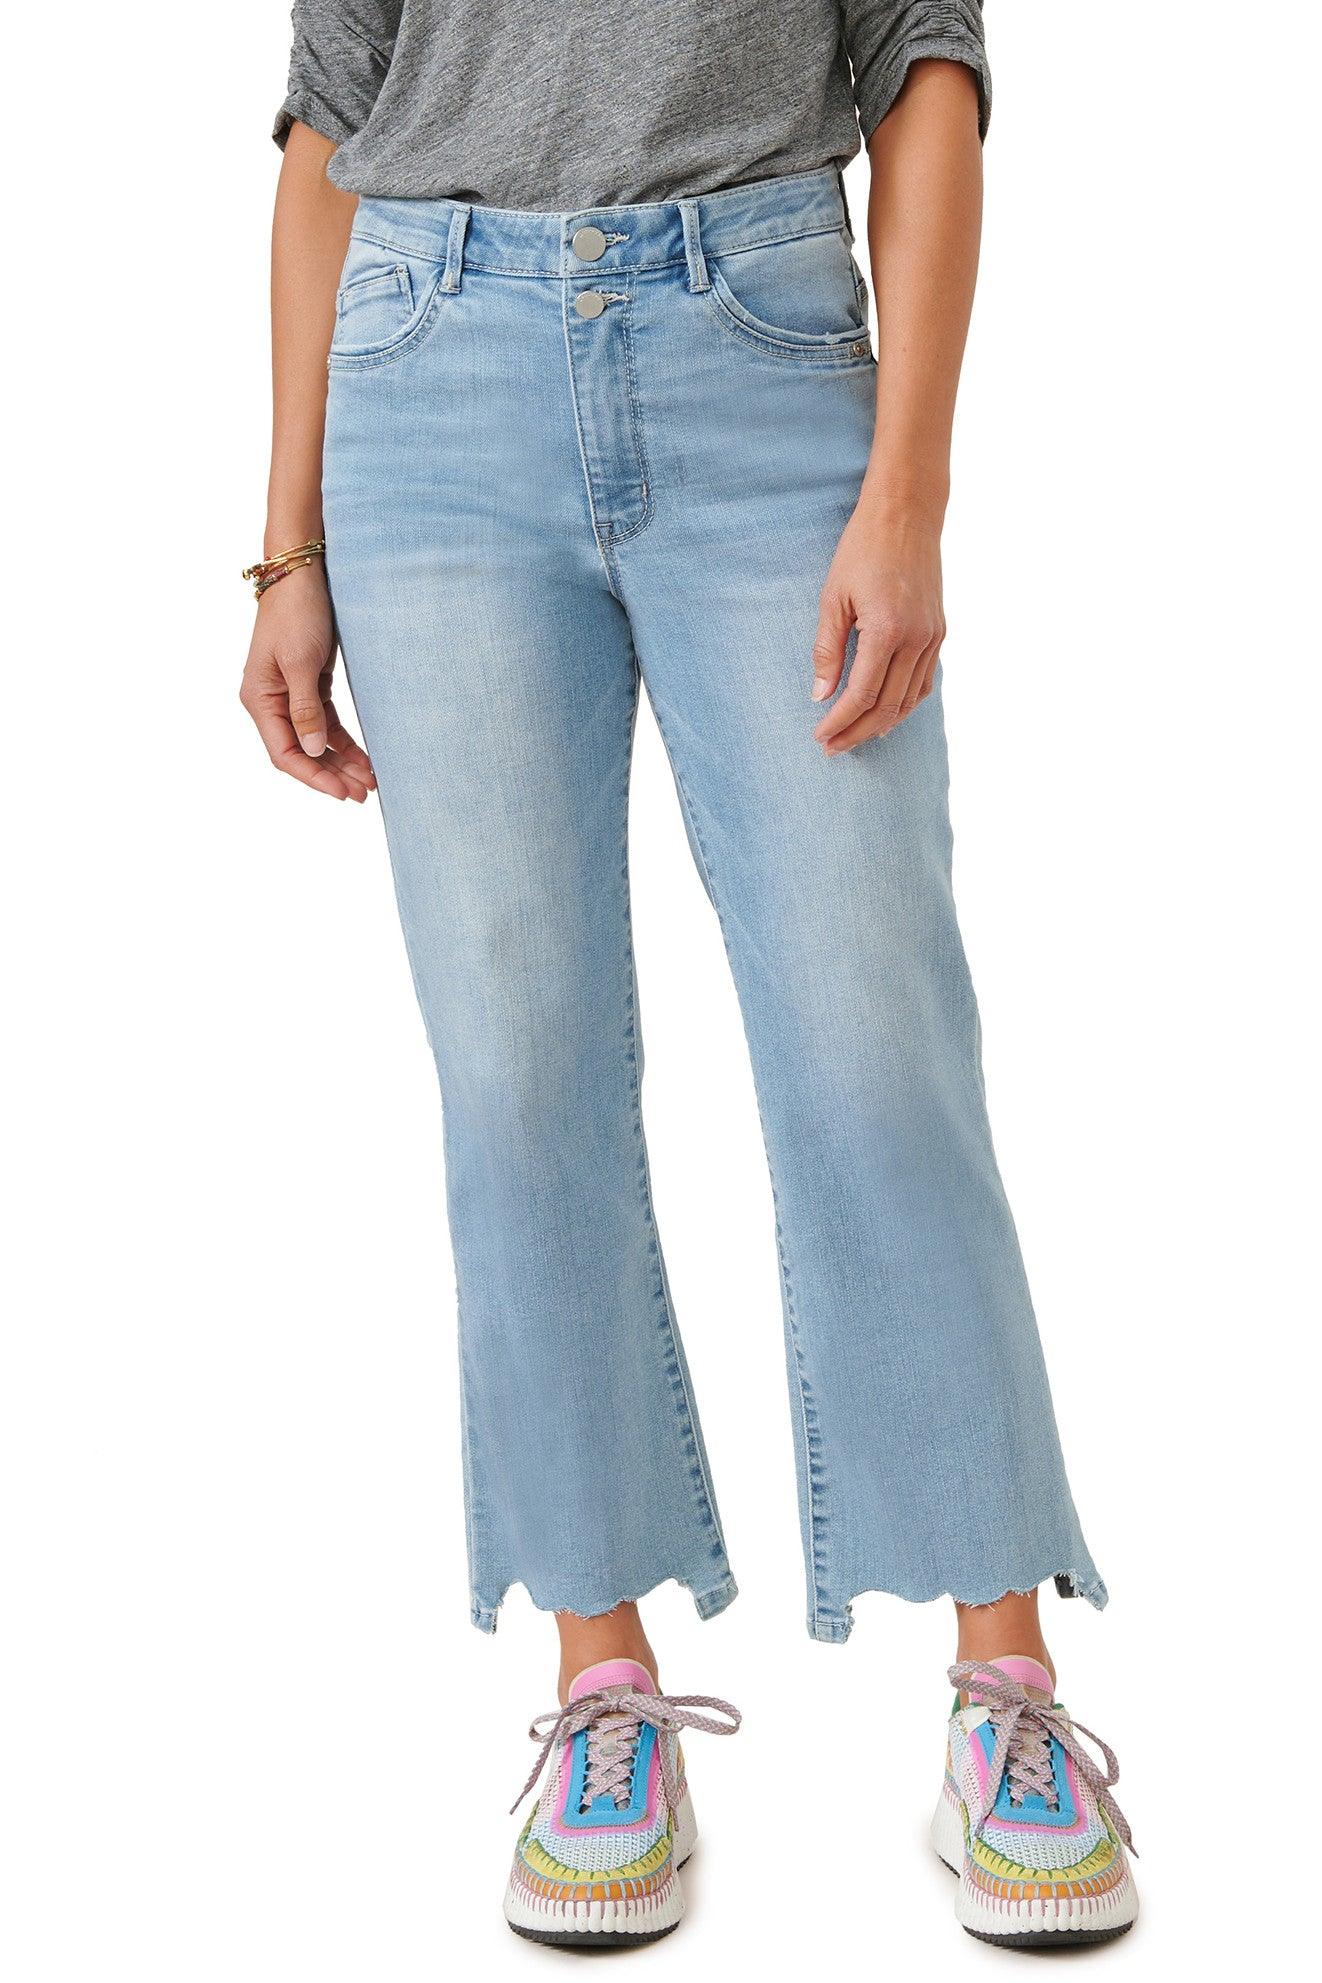 Democracy Barely Boot with Scallop Hem Jeans - Strawberry Moon Boutique